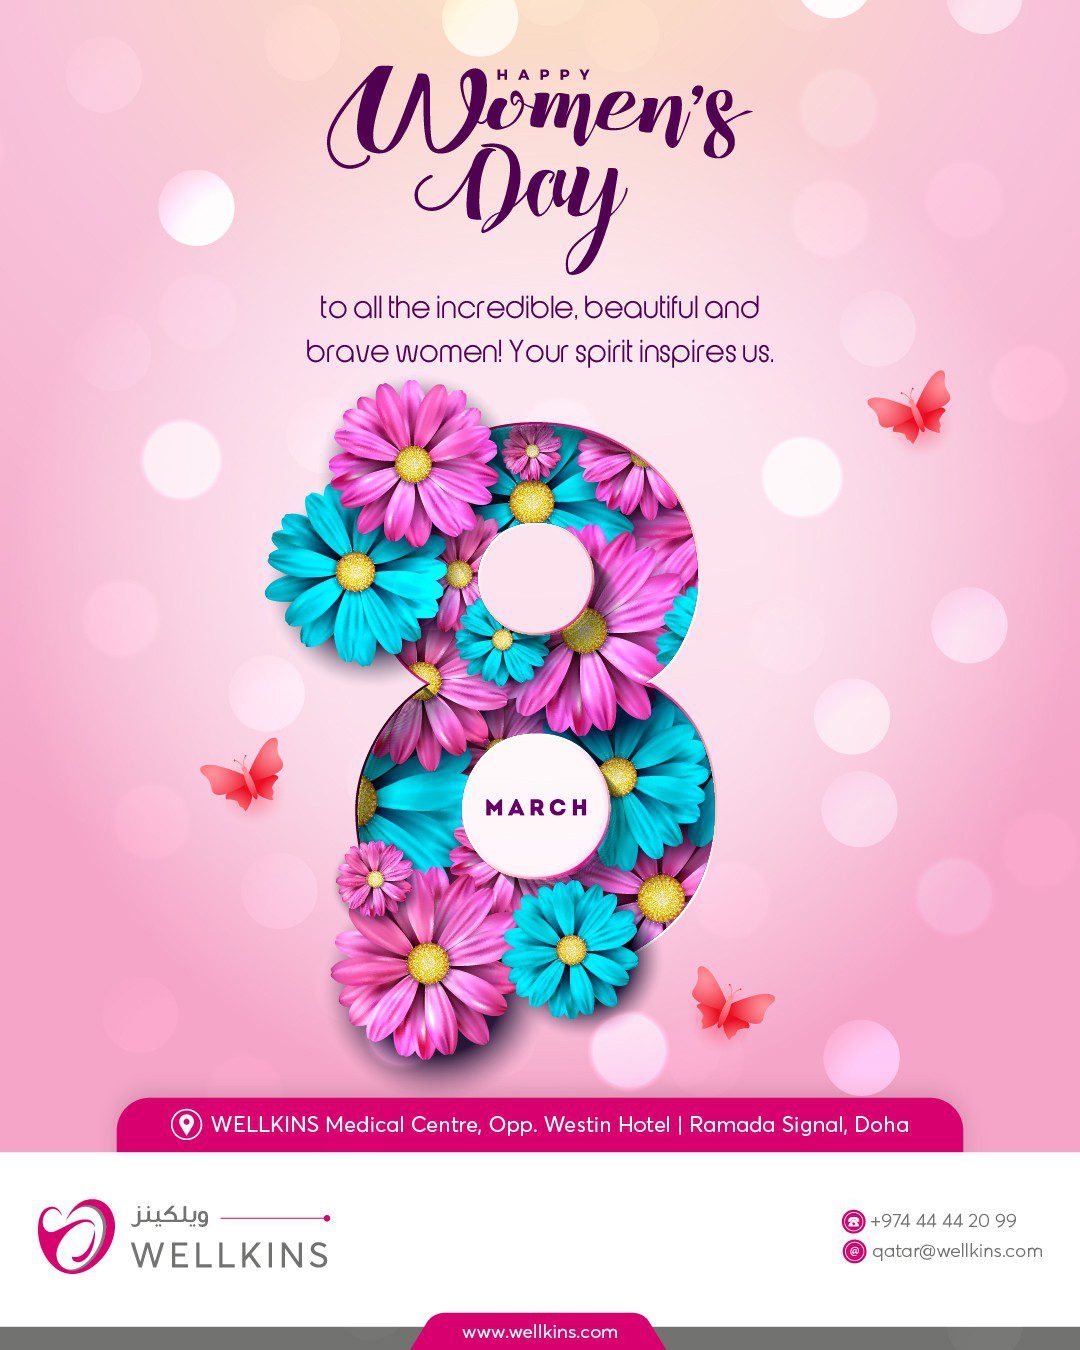 #HappyWomensDay
To all the amazing women in healthcare and beyond, thank you for all that you do. We see you, we appreciate you, and we celebrate you. Happy International Women's Day! 

_______________________________
To learn more about #WELLKINSQATAR and our services, kindly visit our website www.wellkins.com
Helpline: 4444 2099
_______________________________
#WELLKINS #MedicalCentre #InternationalWomensDay